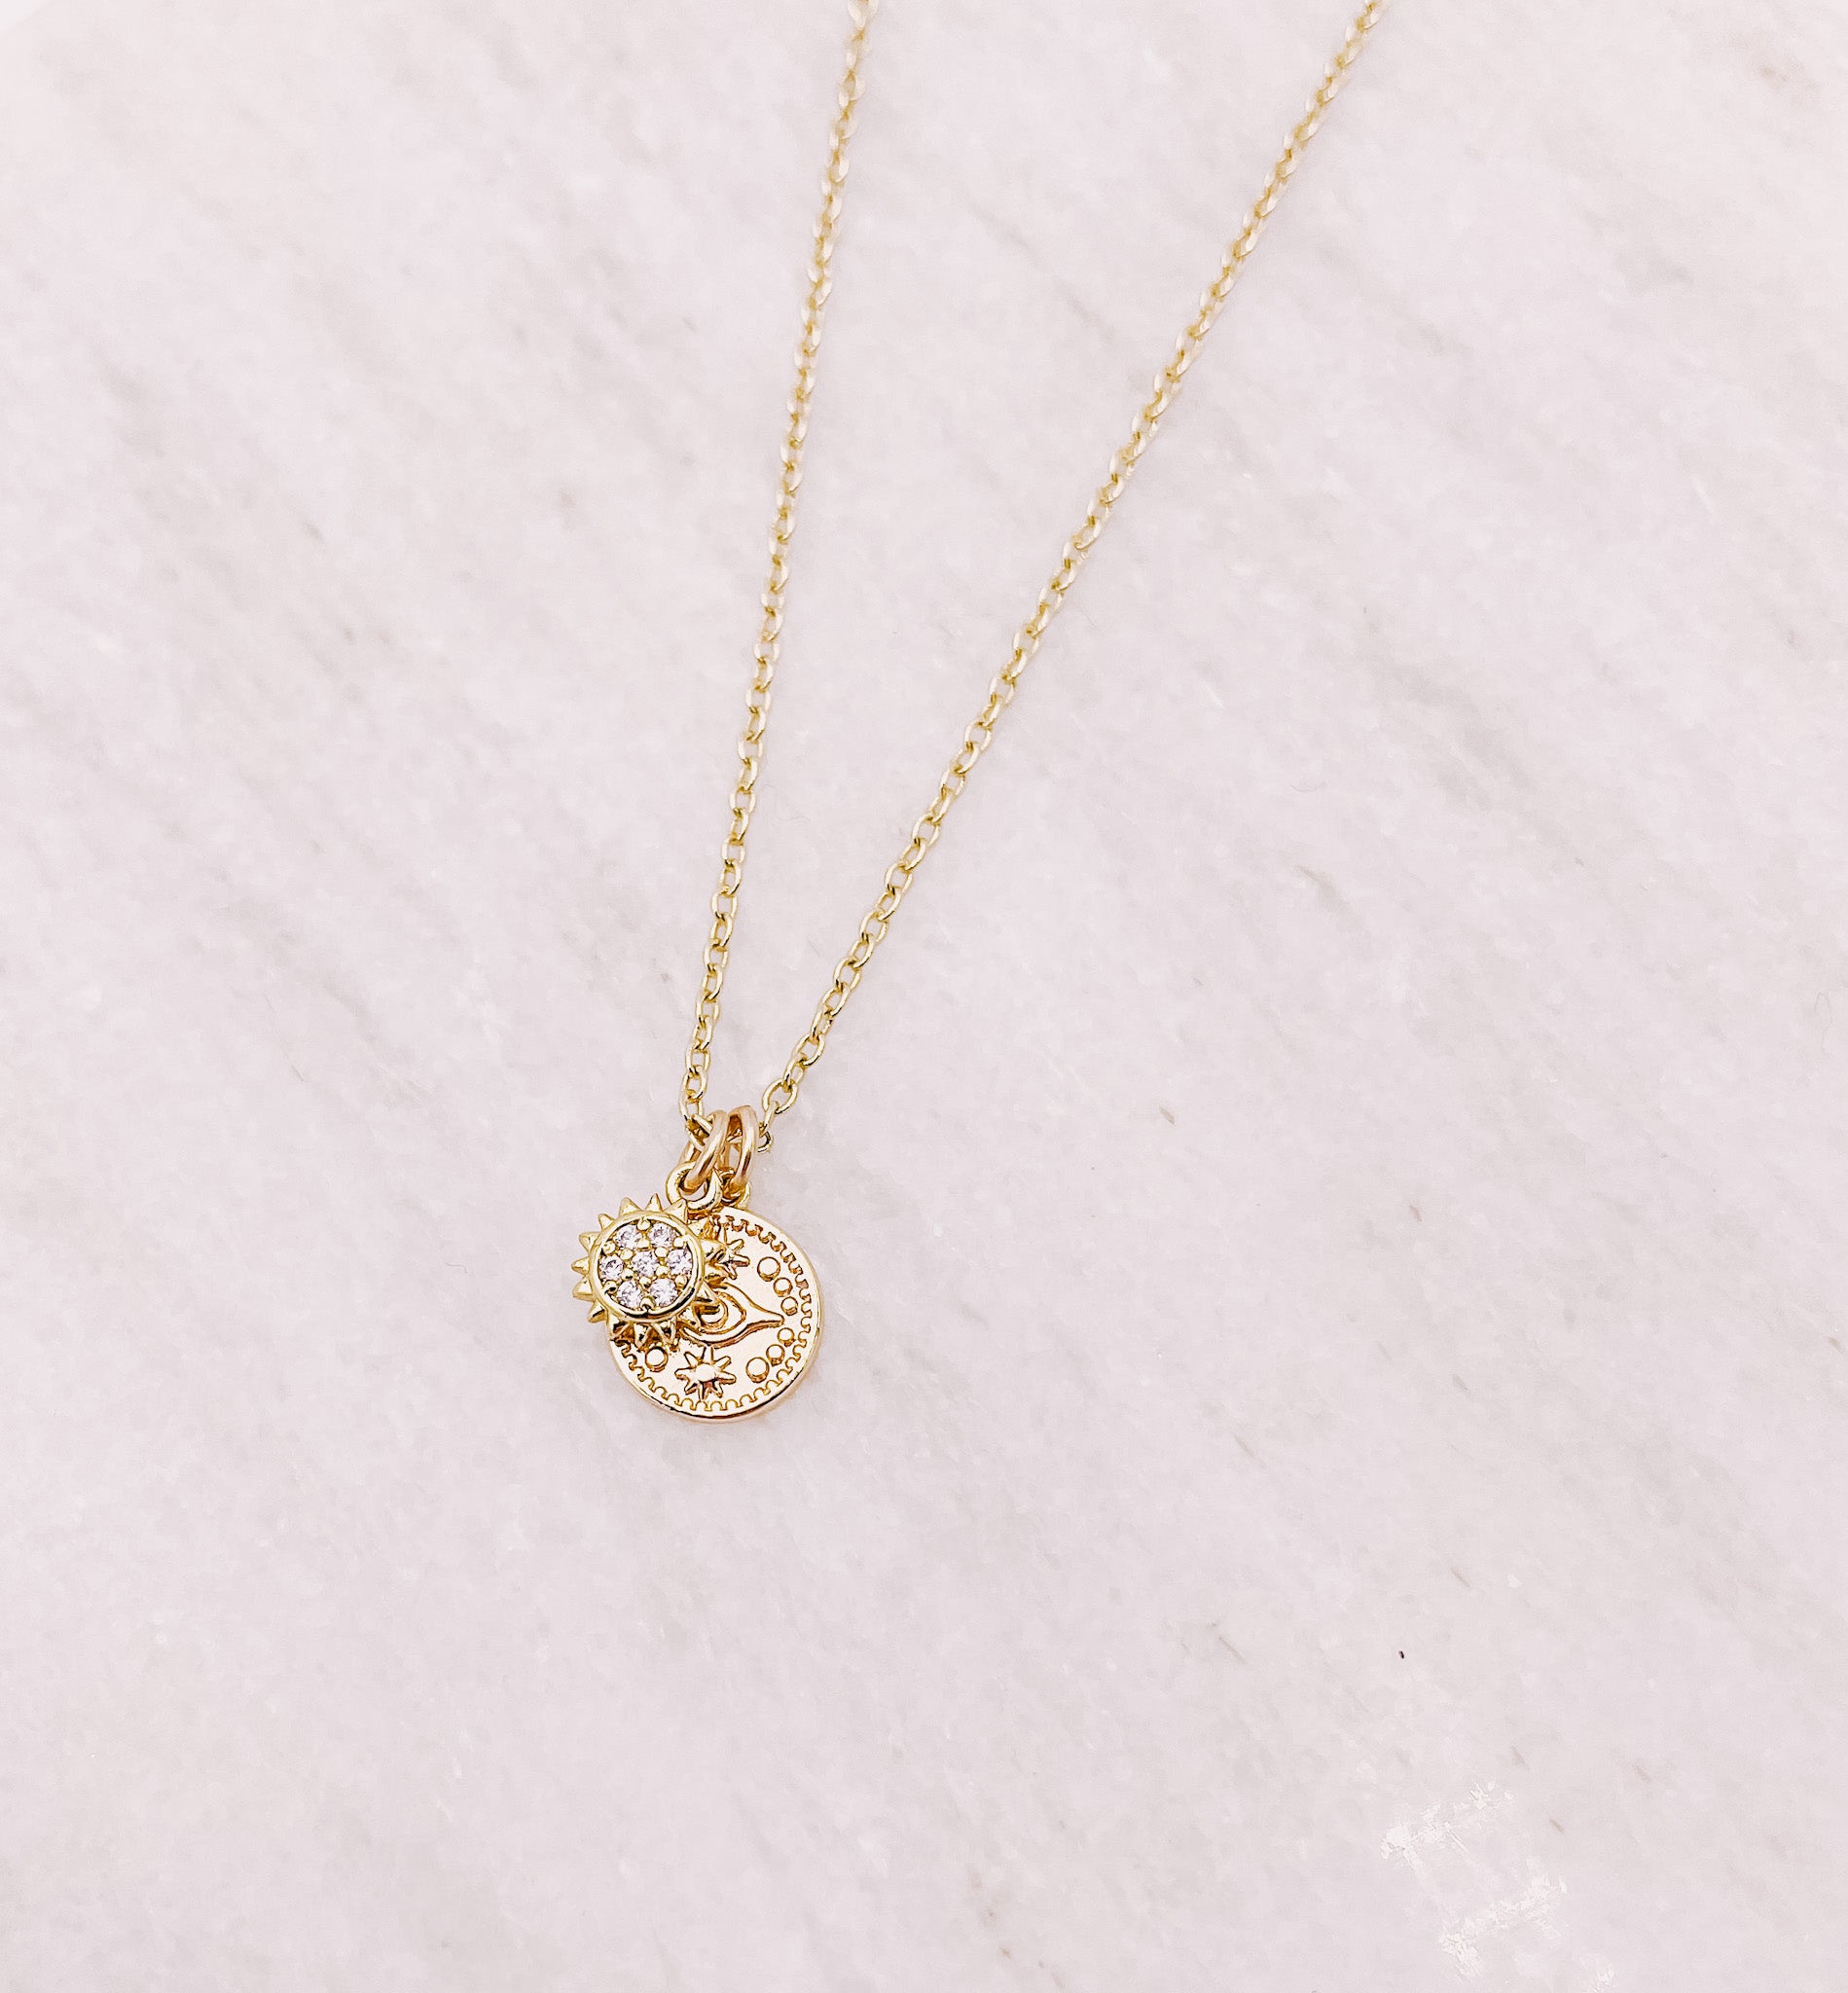 AW Boutique's gold filled 16 inch dainty necklace with a mini Sun and mini Evil Eye Coin charm pendant. Part of Celestial collection. Gold filled jewellery.